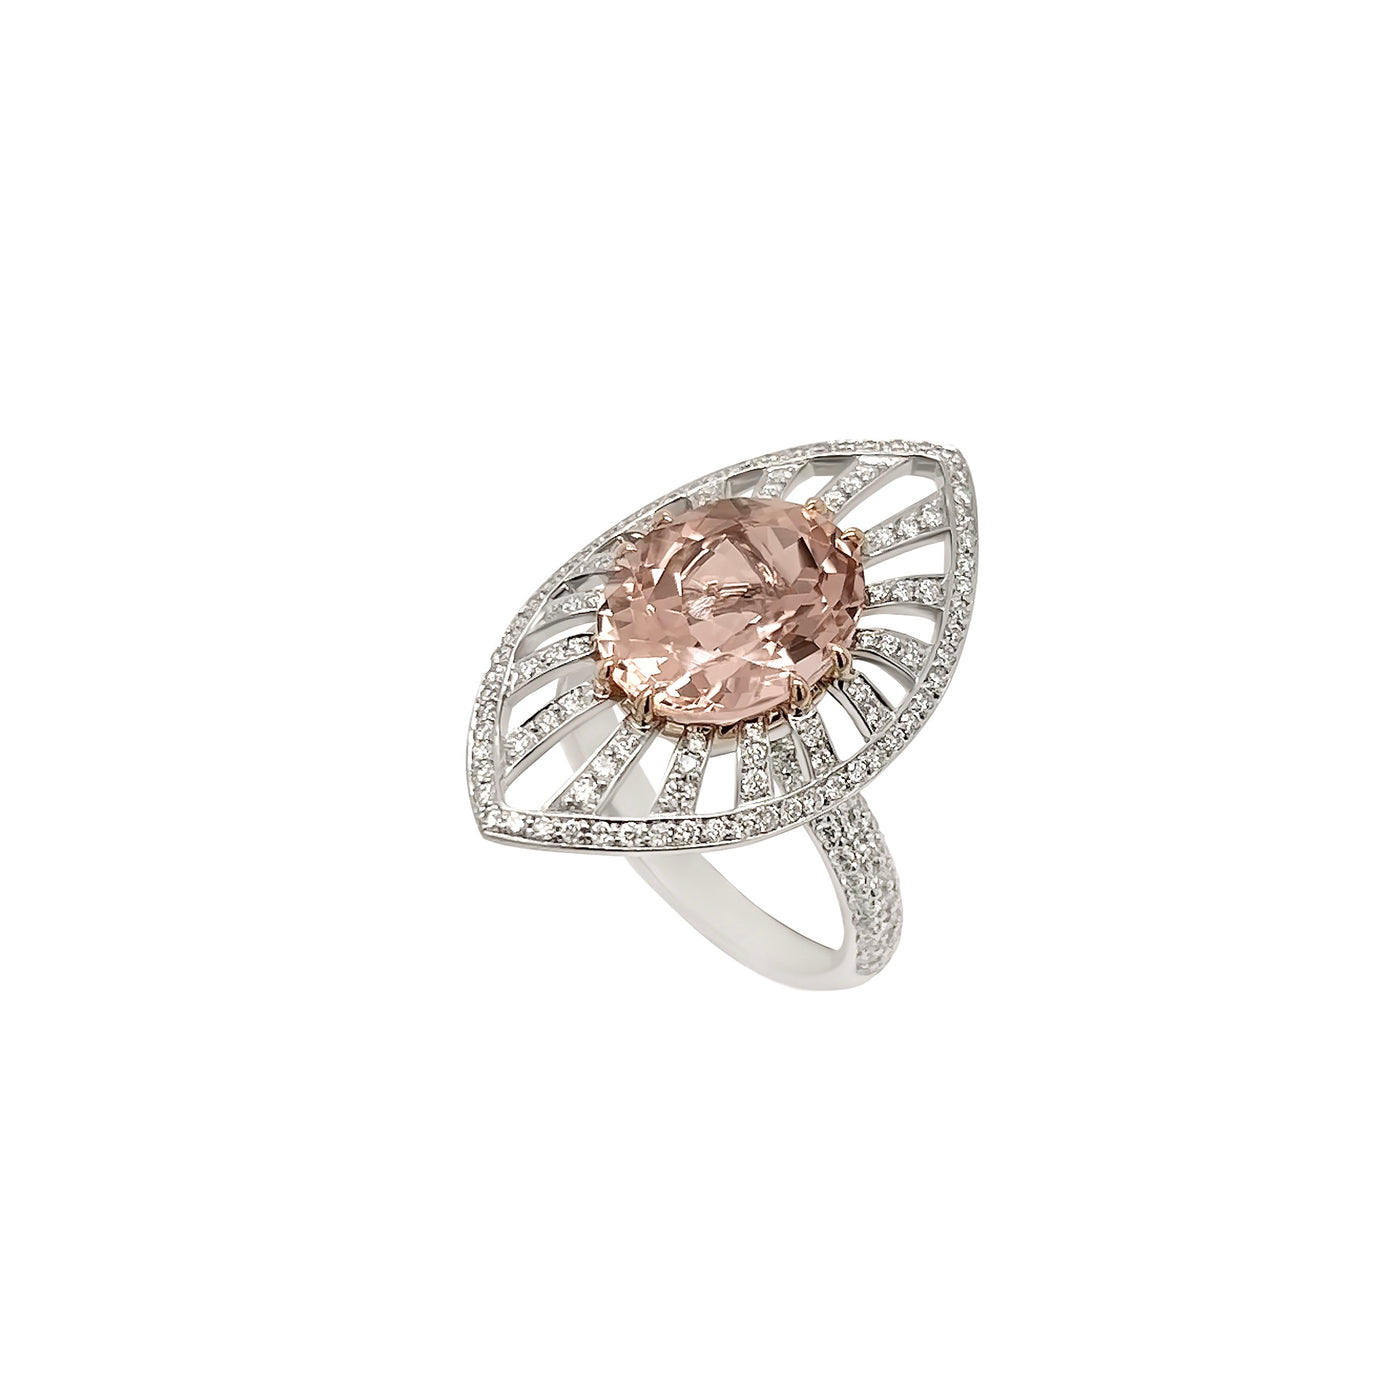 Natural Peach Morganite and Diamond Ring in 18k White Gold